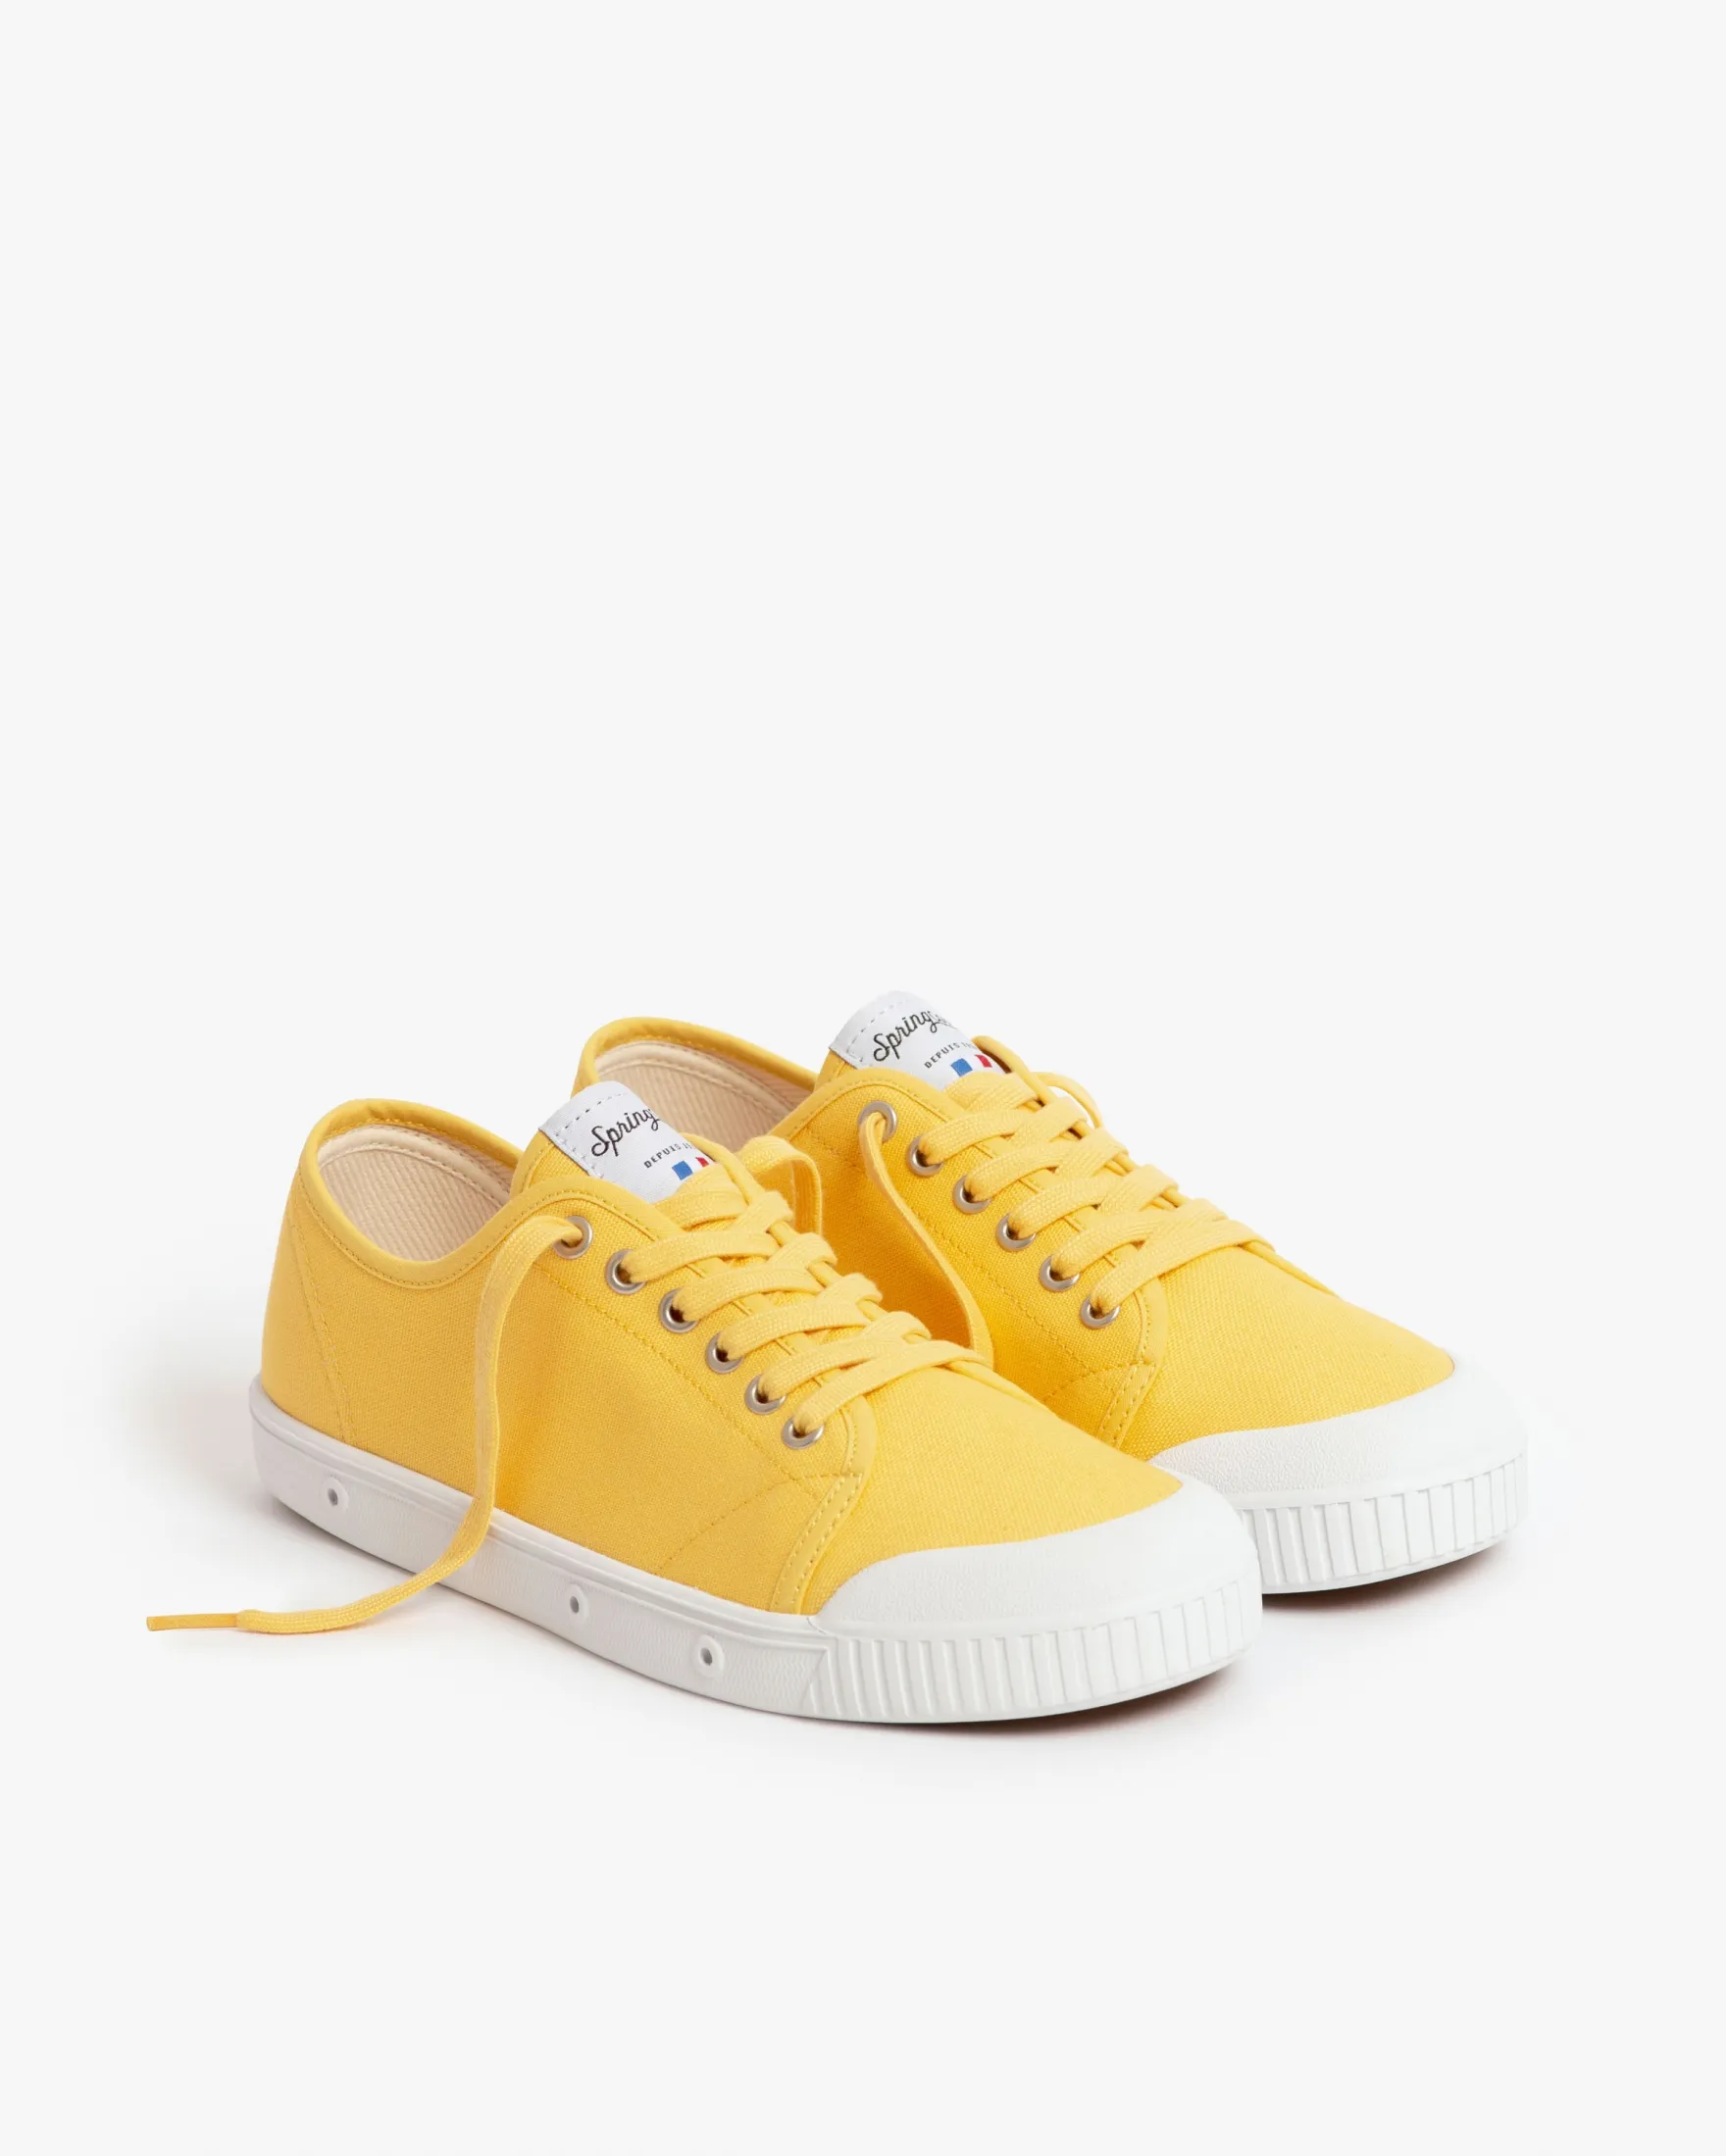 Low top yellow canvas trainer